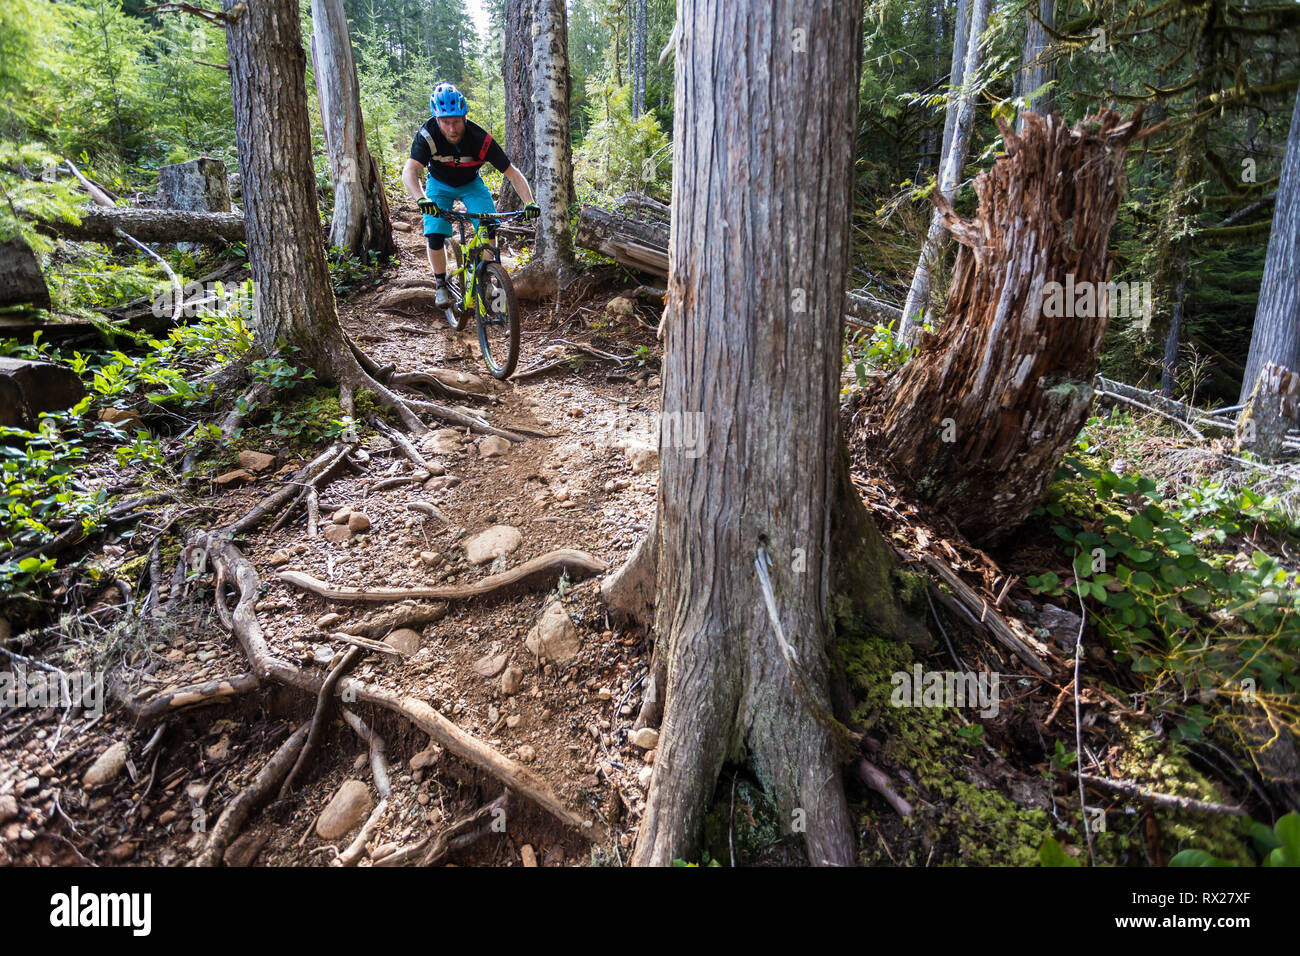 Cumberland's 'Off Broadway' a steep single track mountain bike trail is generally reserved for the advanced mountain biker , Cumberland, The Comox Valley, Vancouver Island, British Columbia, Canada. Stock Photo